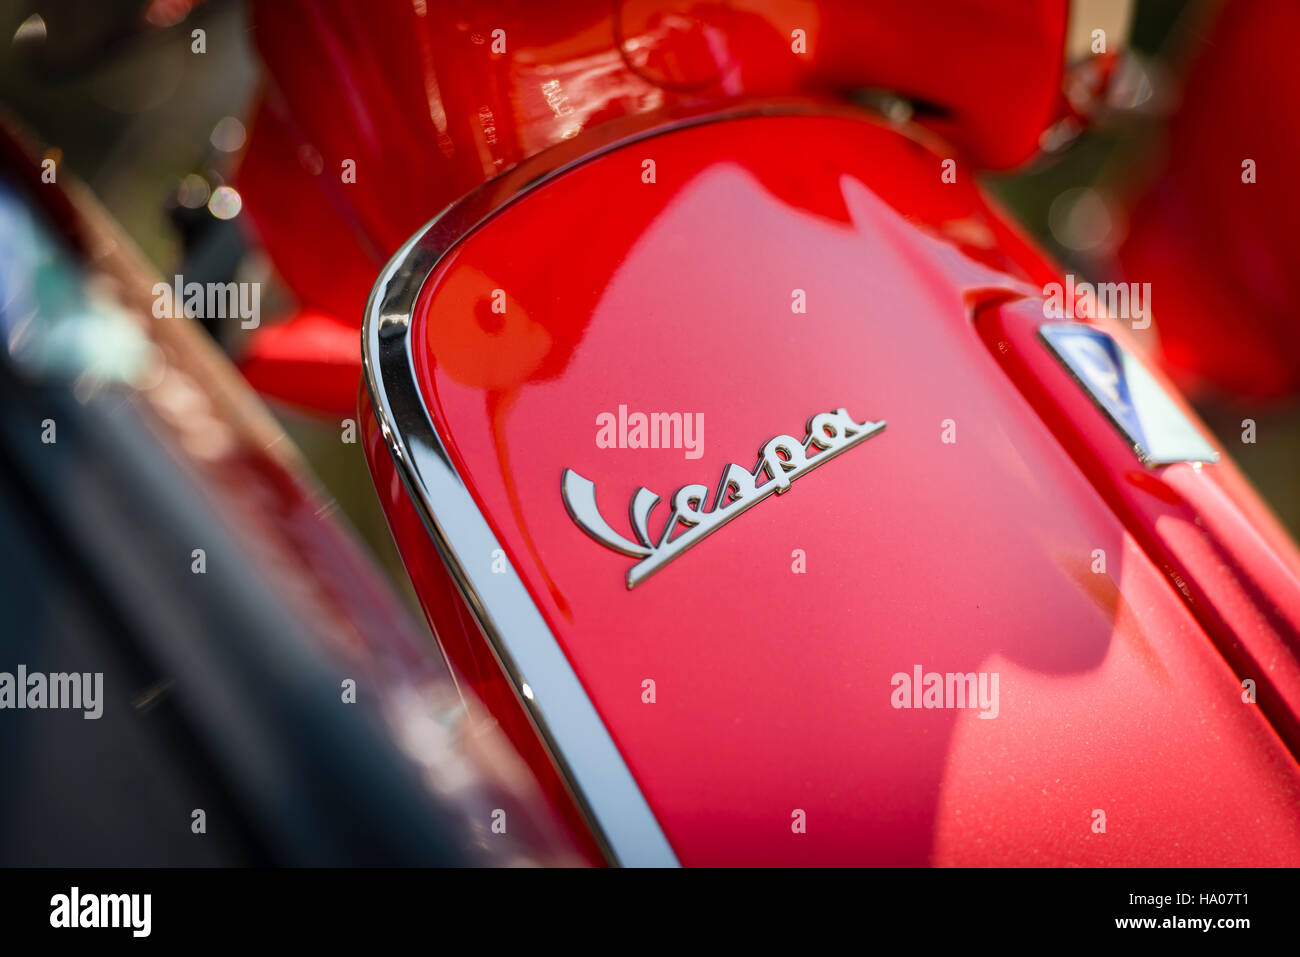 Close-up of the Vespa logo on a bright red Vespa motor scooter parked outside on a street in the sun Stock Photo